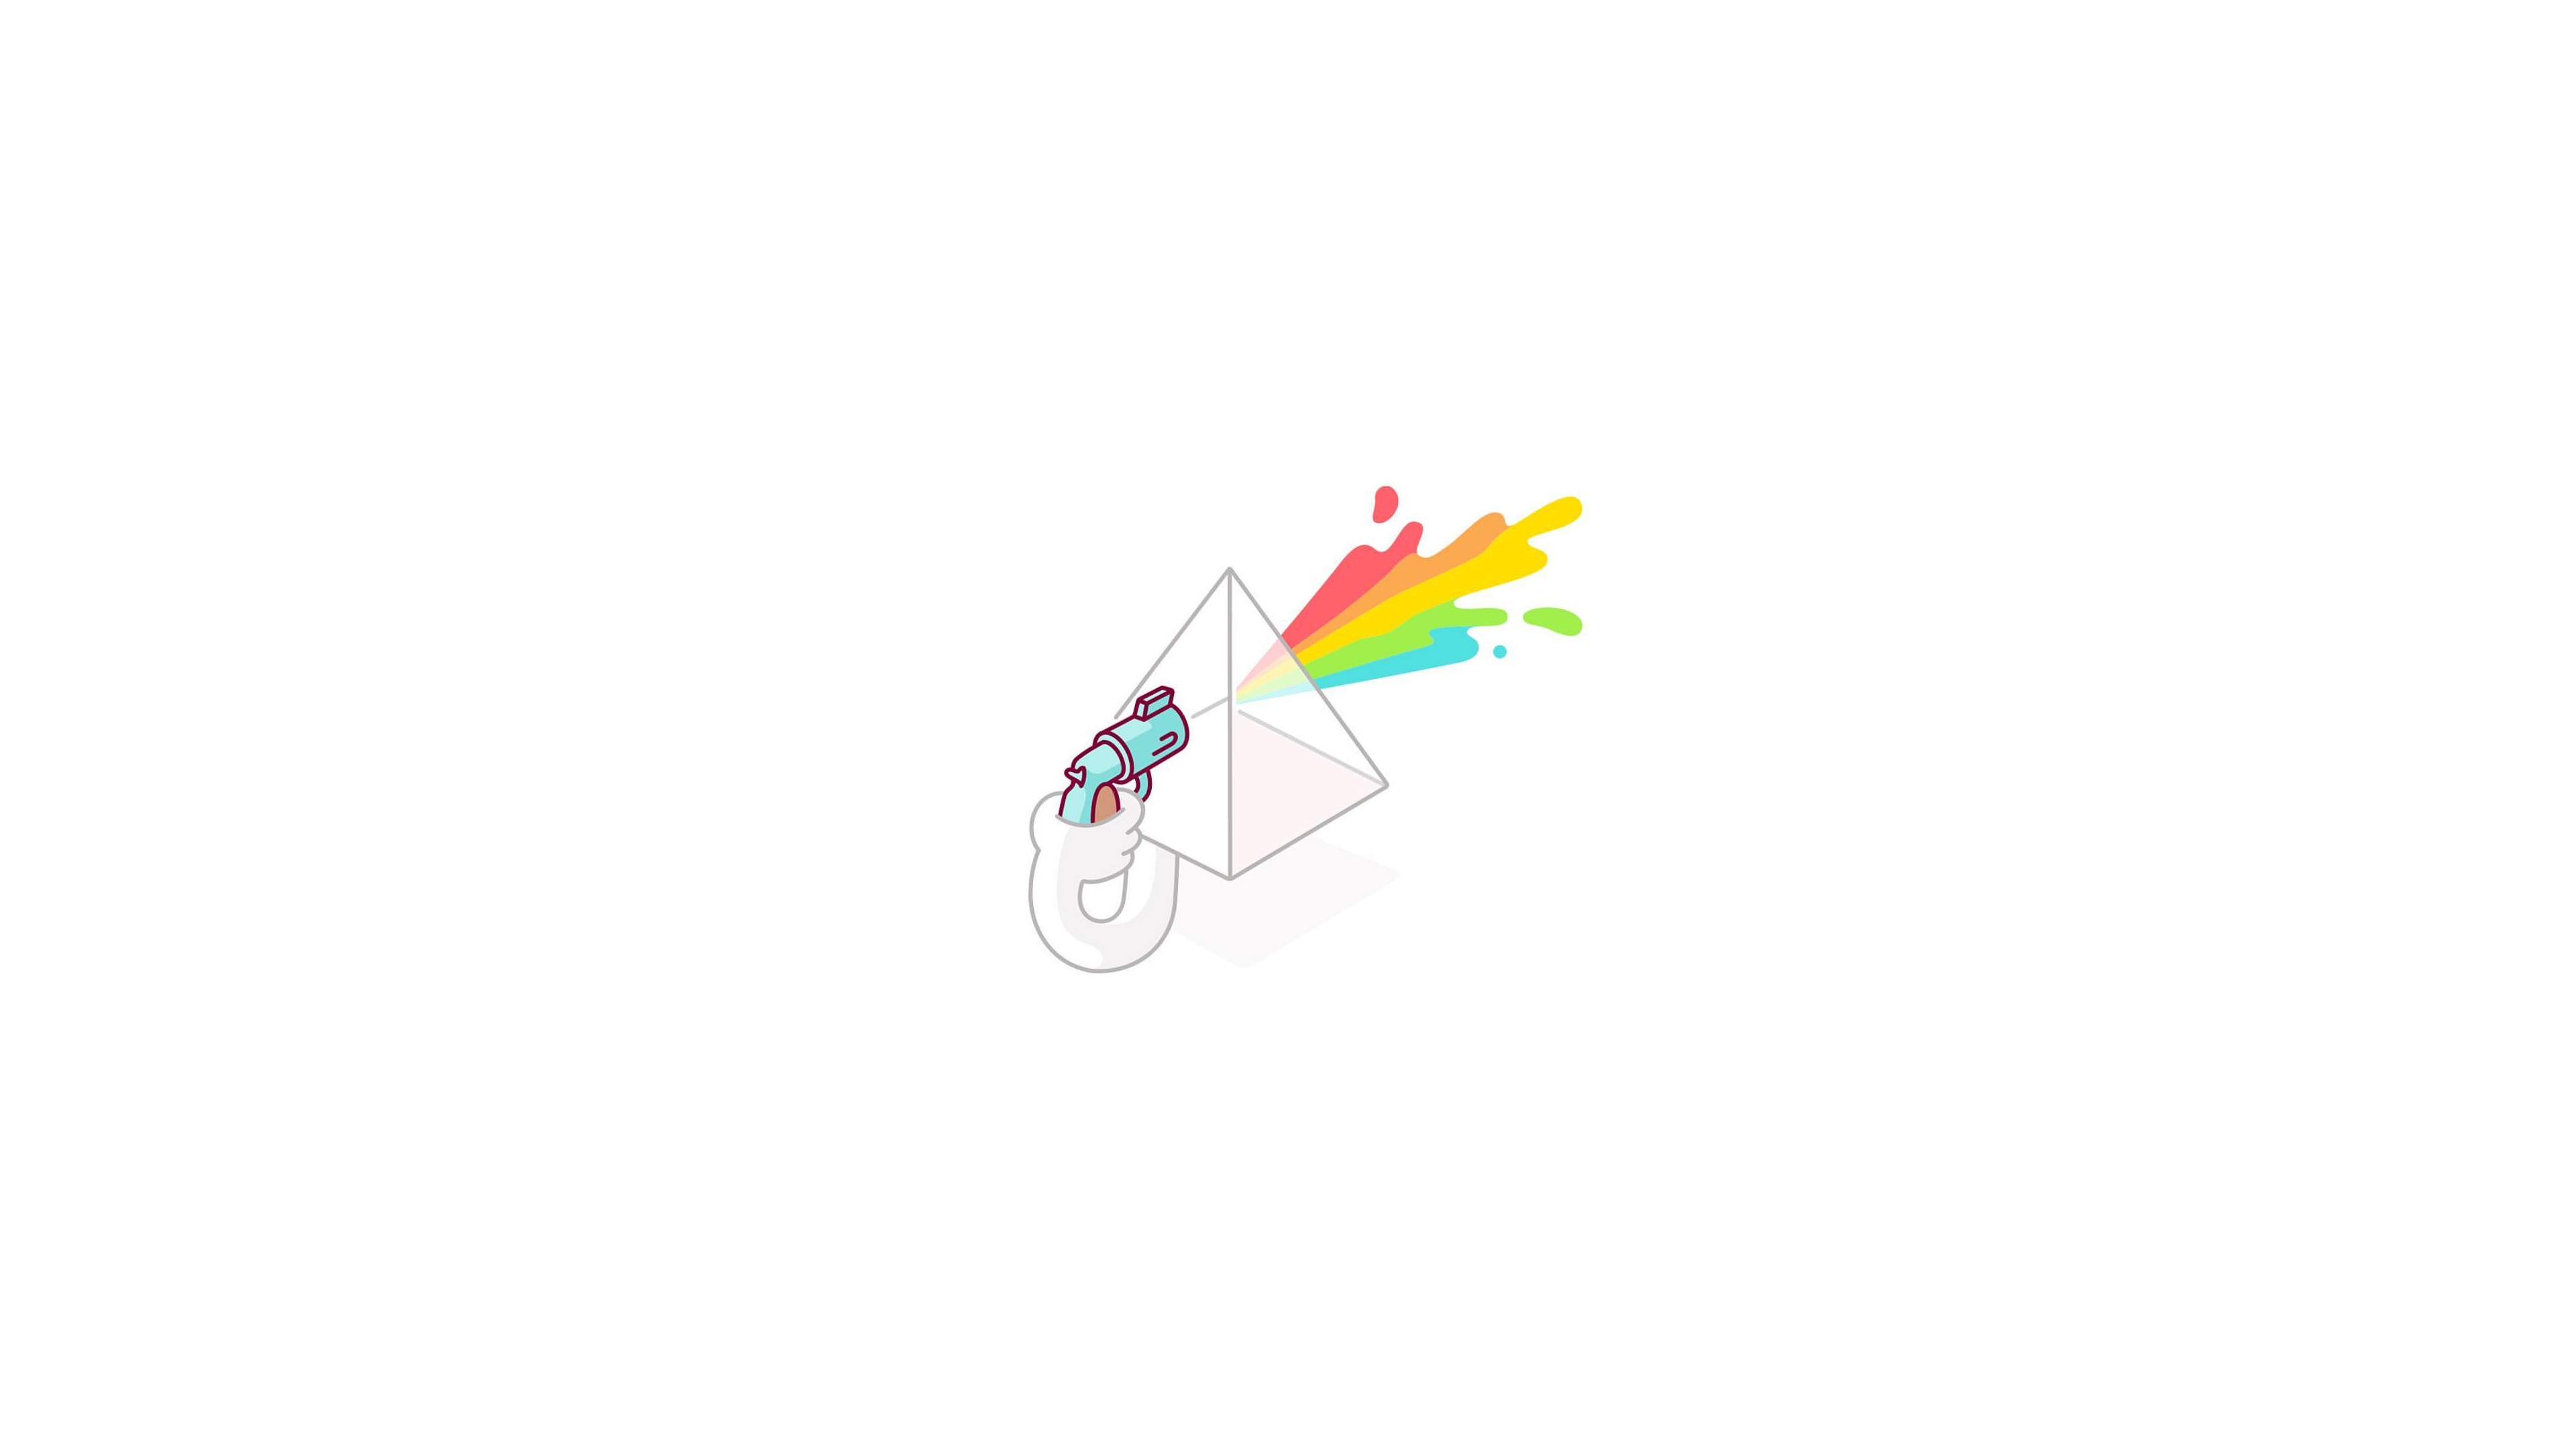 Illustration White Background Water Guns Prism Pyramid Colorful Minimalism The Dark Side Of The Moon 3840x2160